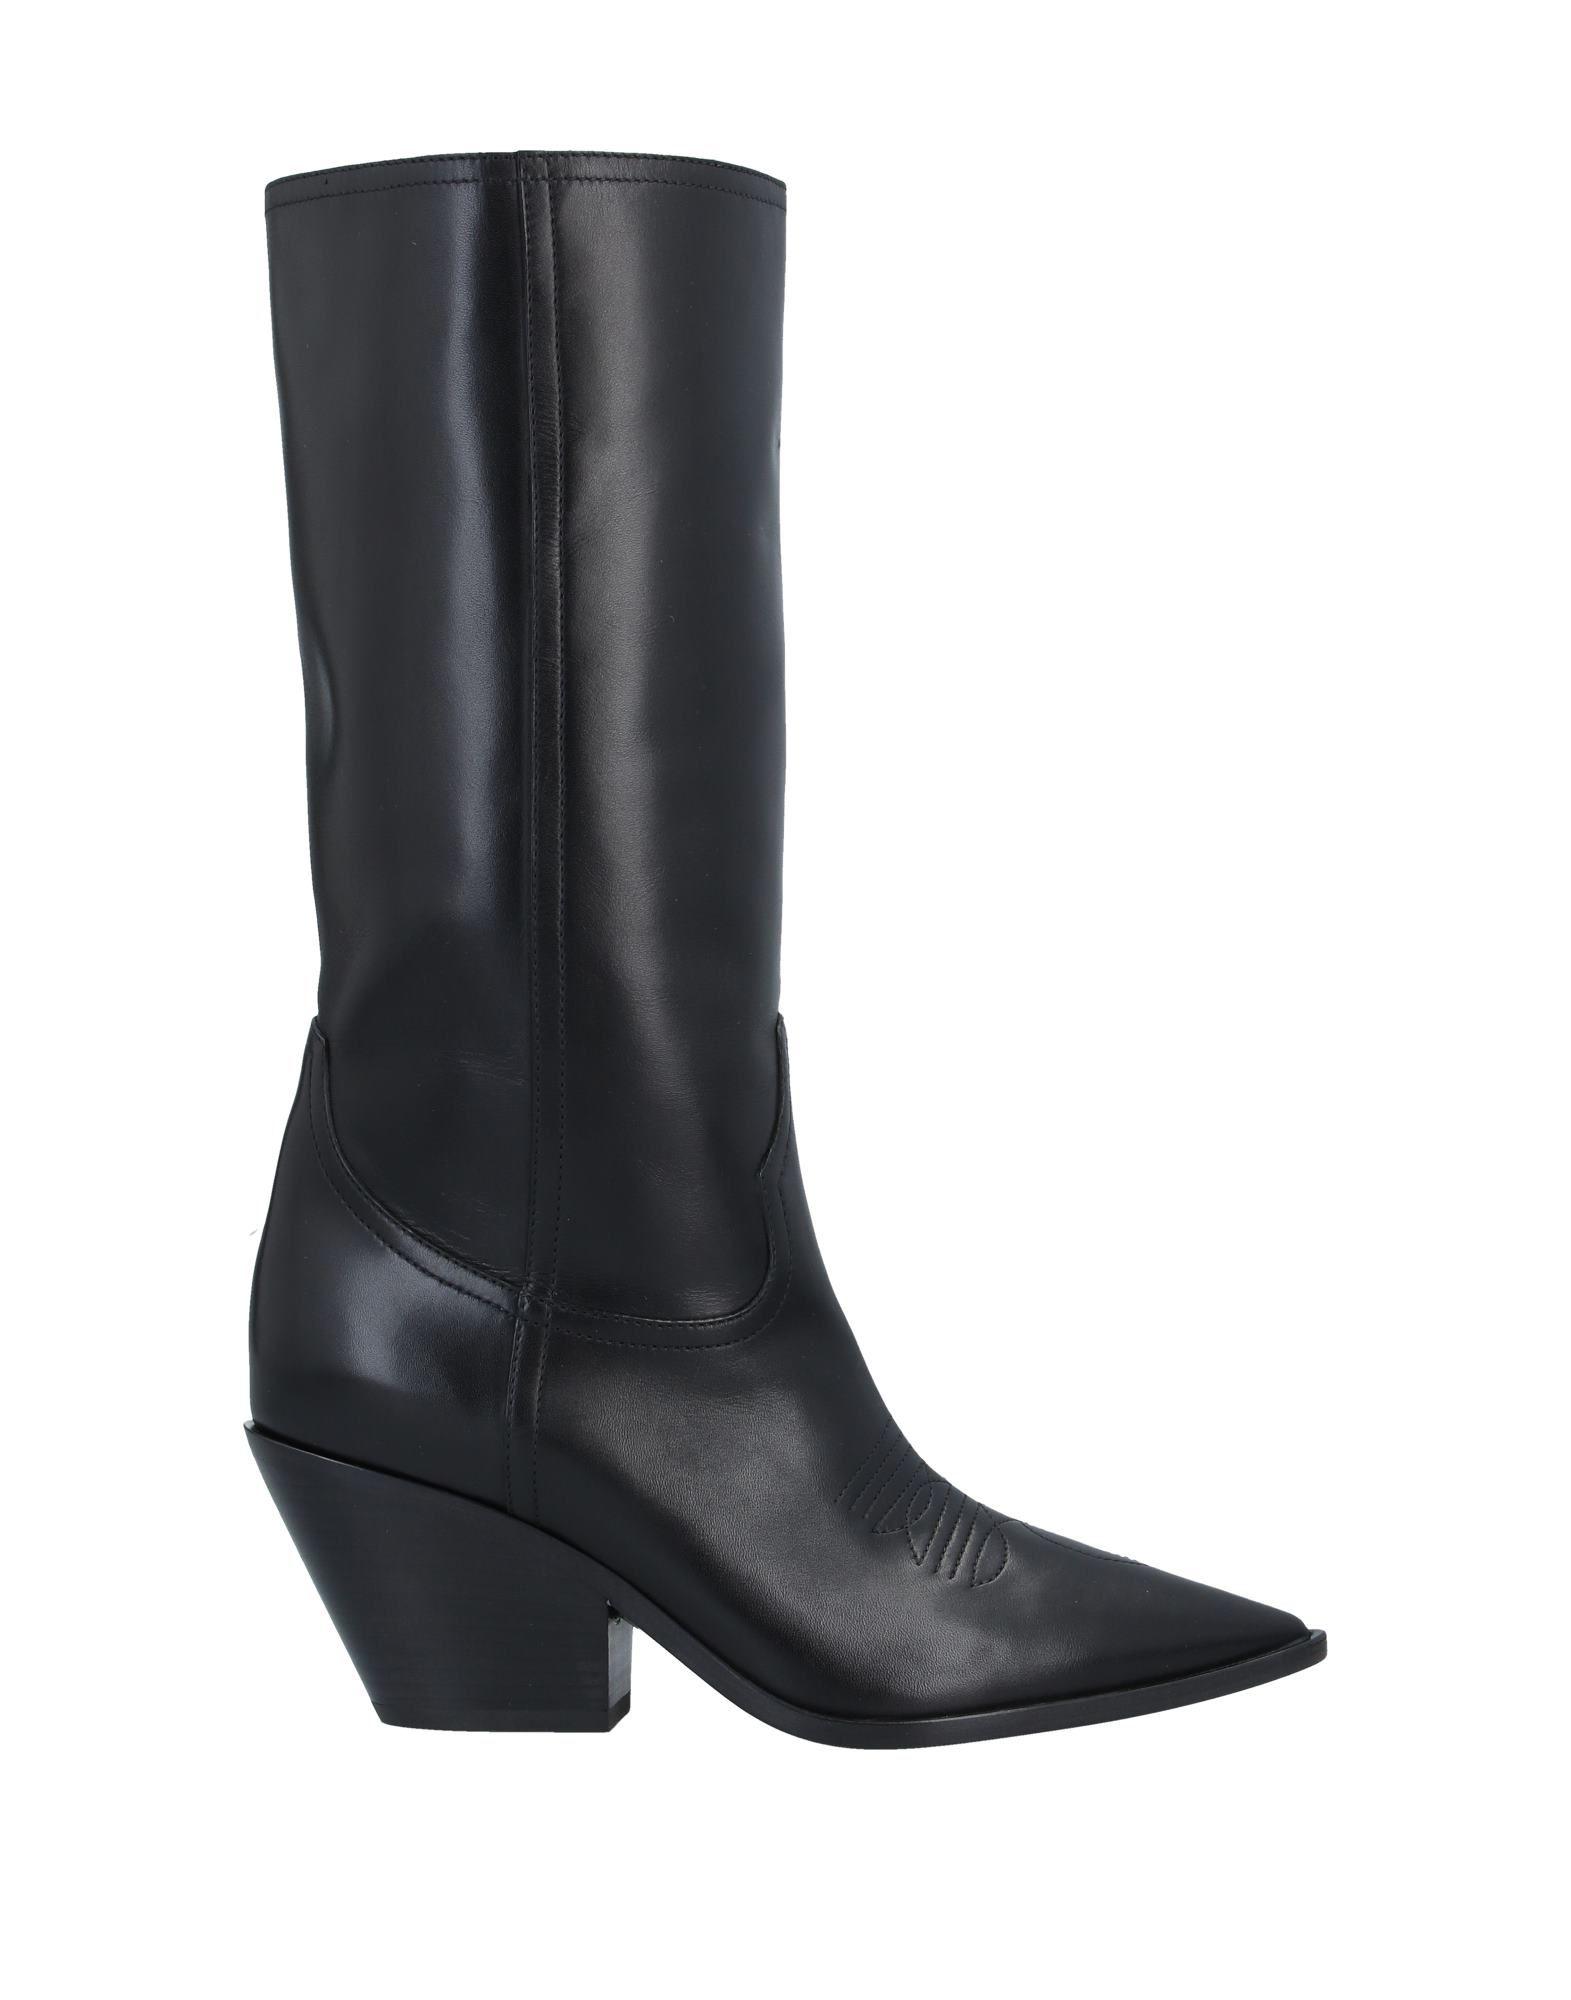 Casadei Leather Boots in Black - Lyst